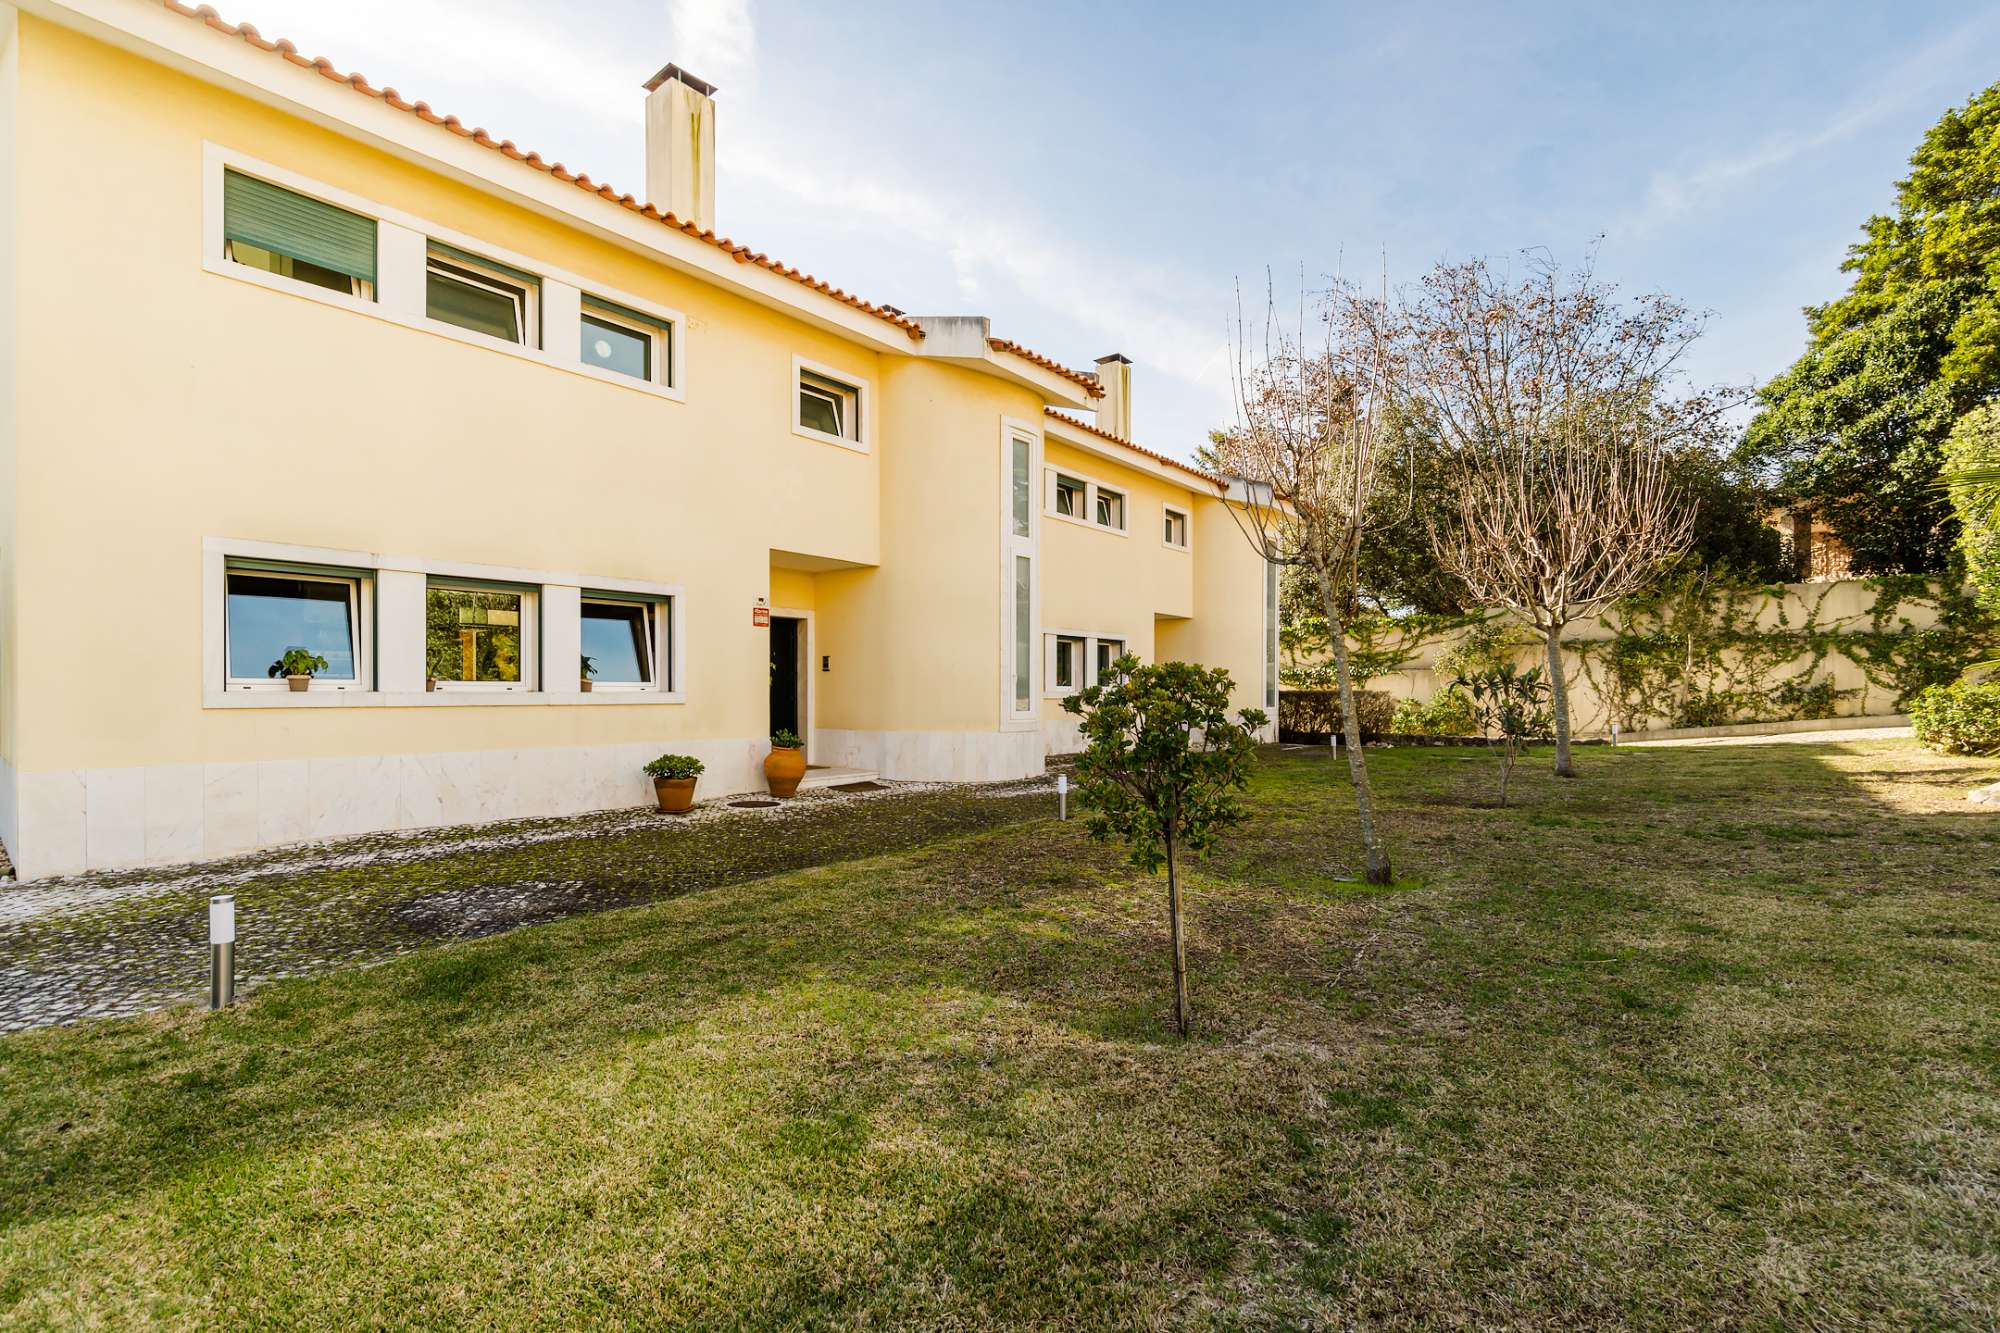 3-bedroom villa with private terrace for rent in Cascais